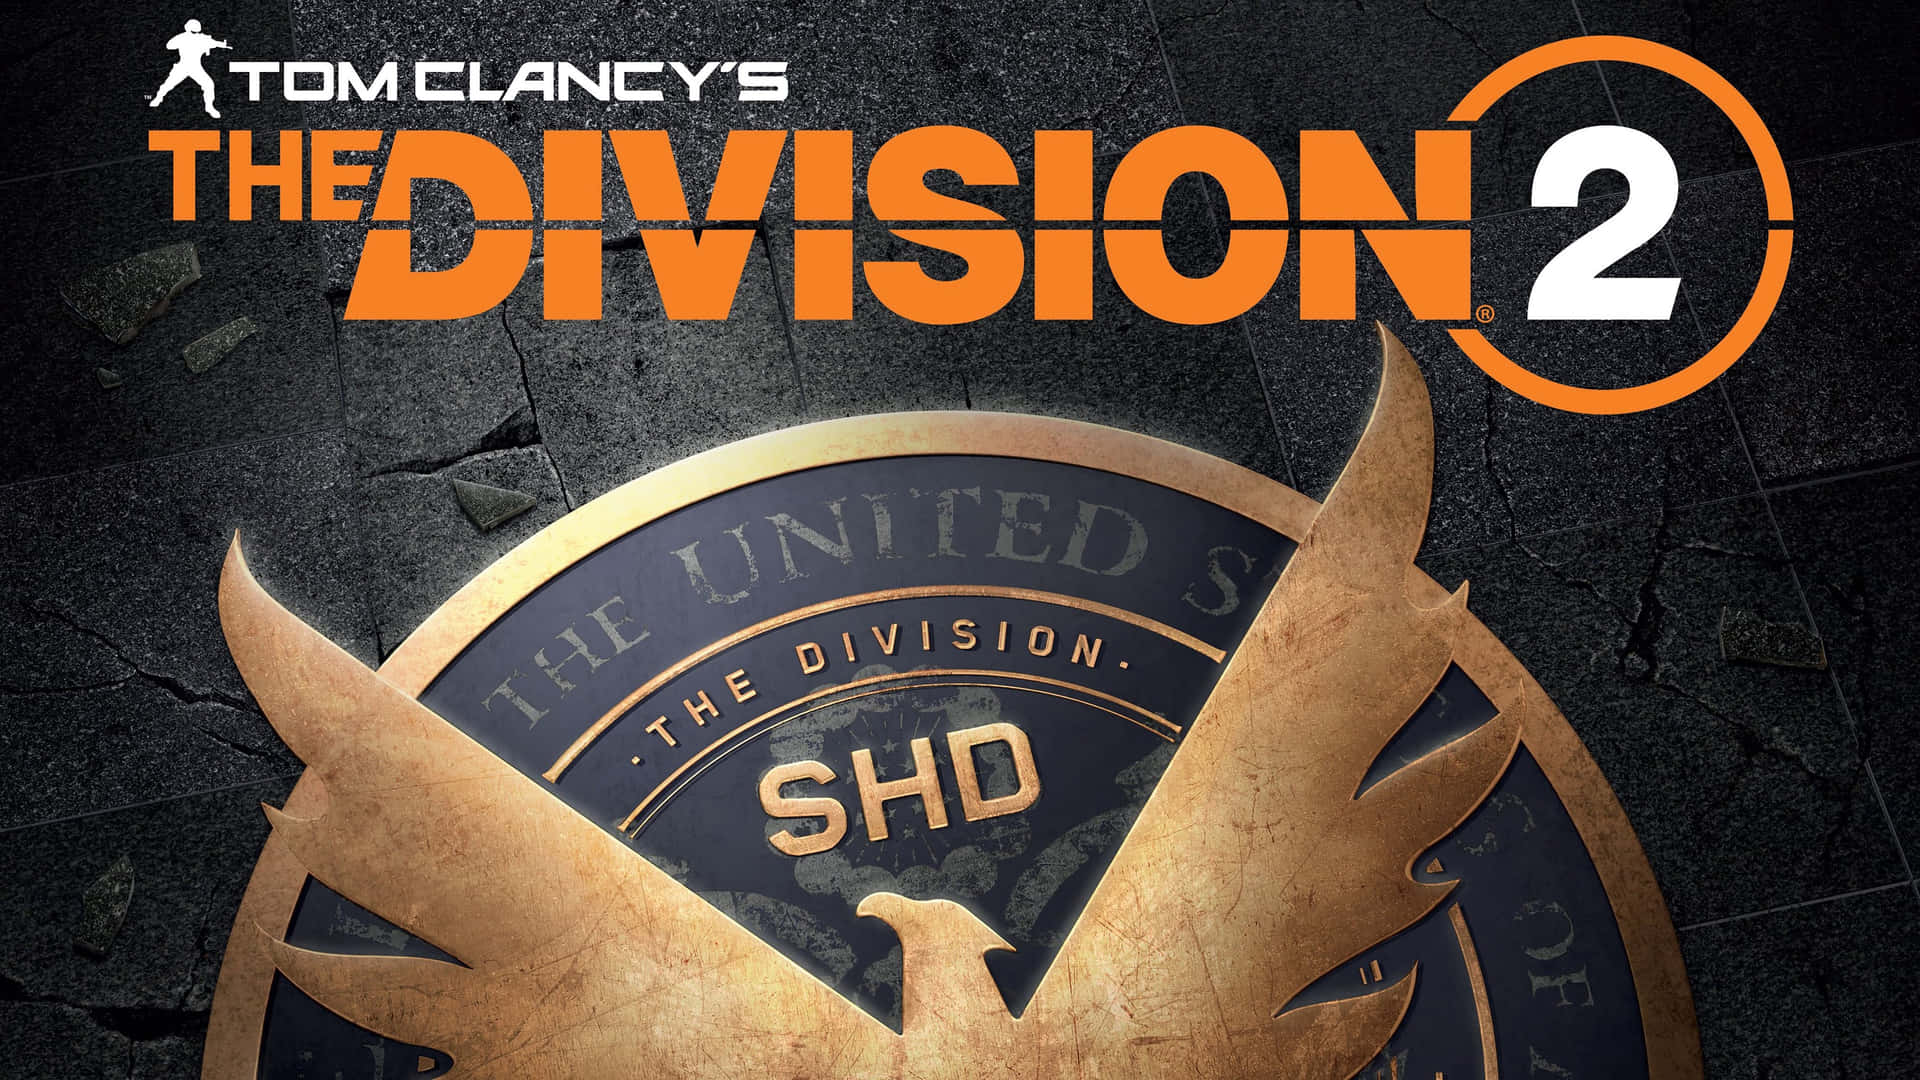 Experience The Division 2 in stunning 4K resolution Wallpaper